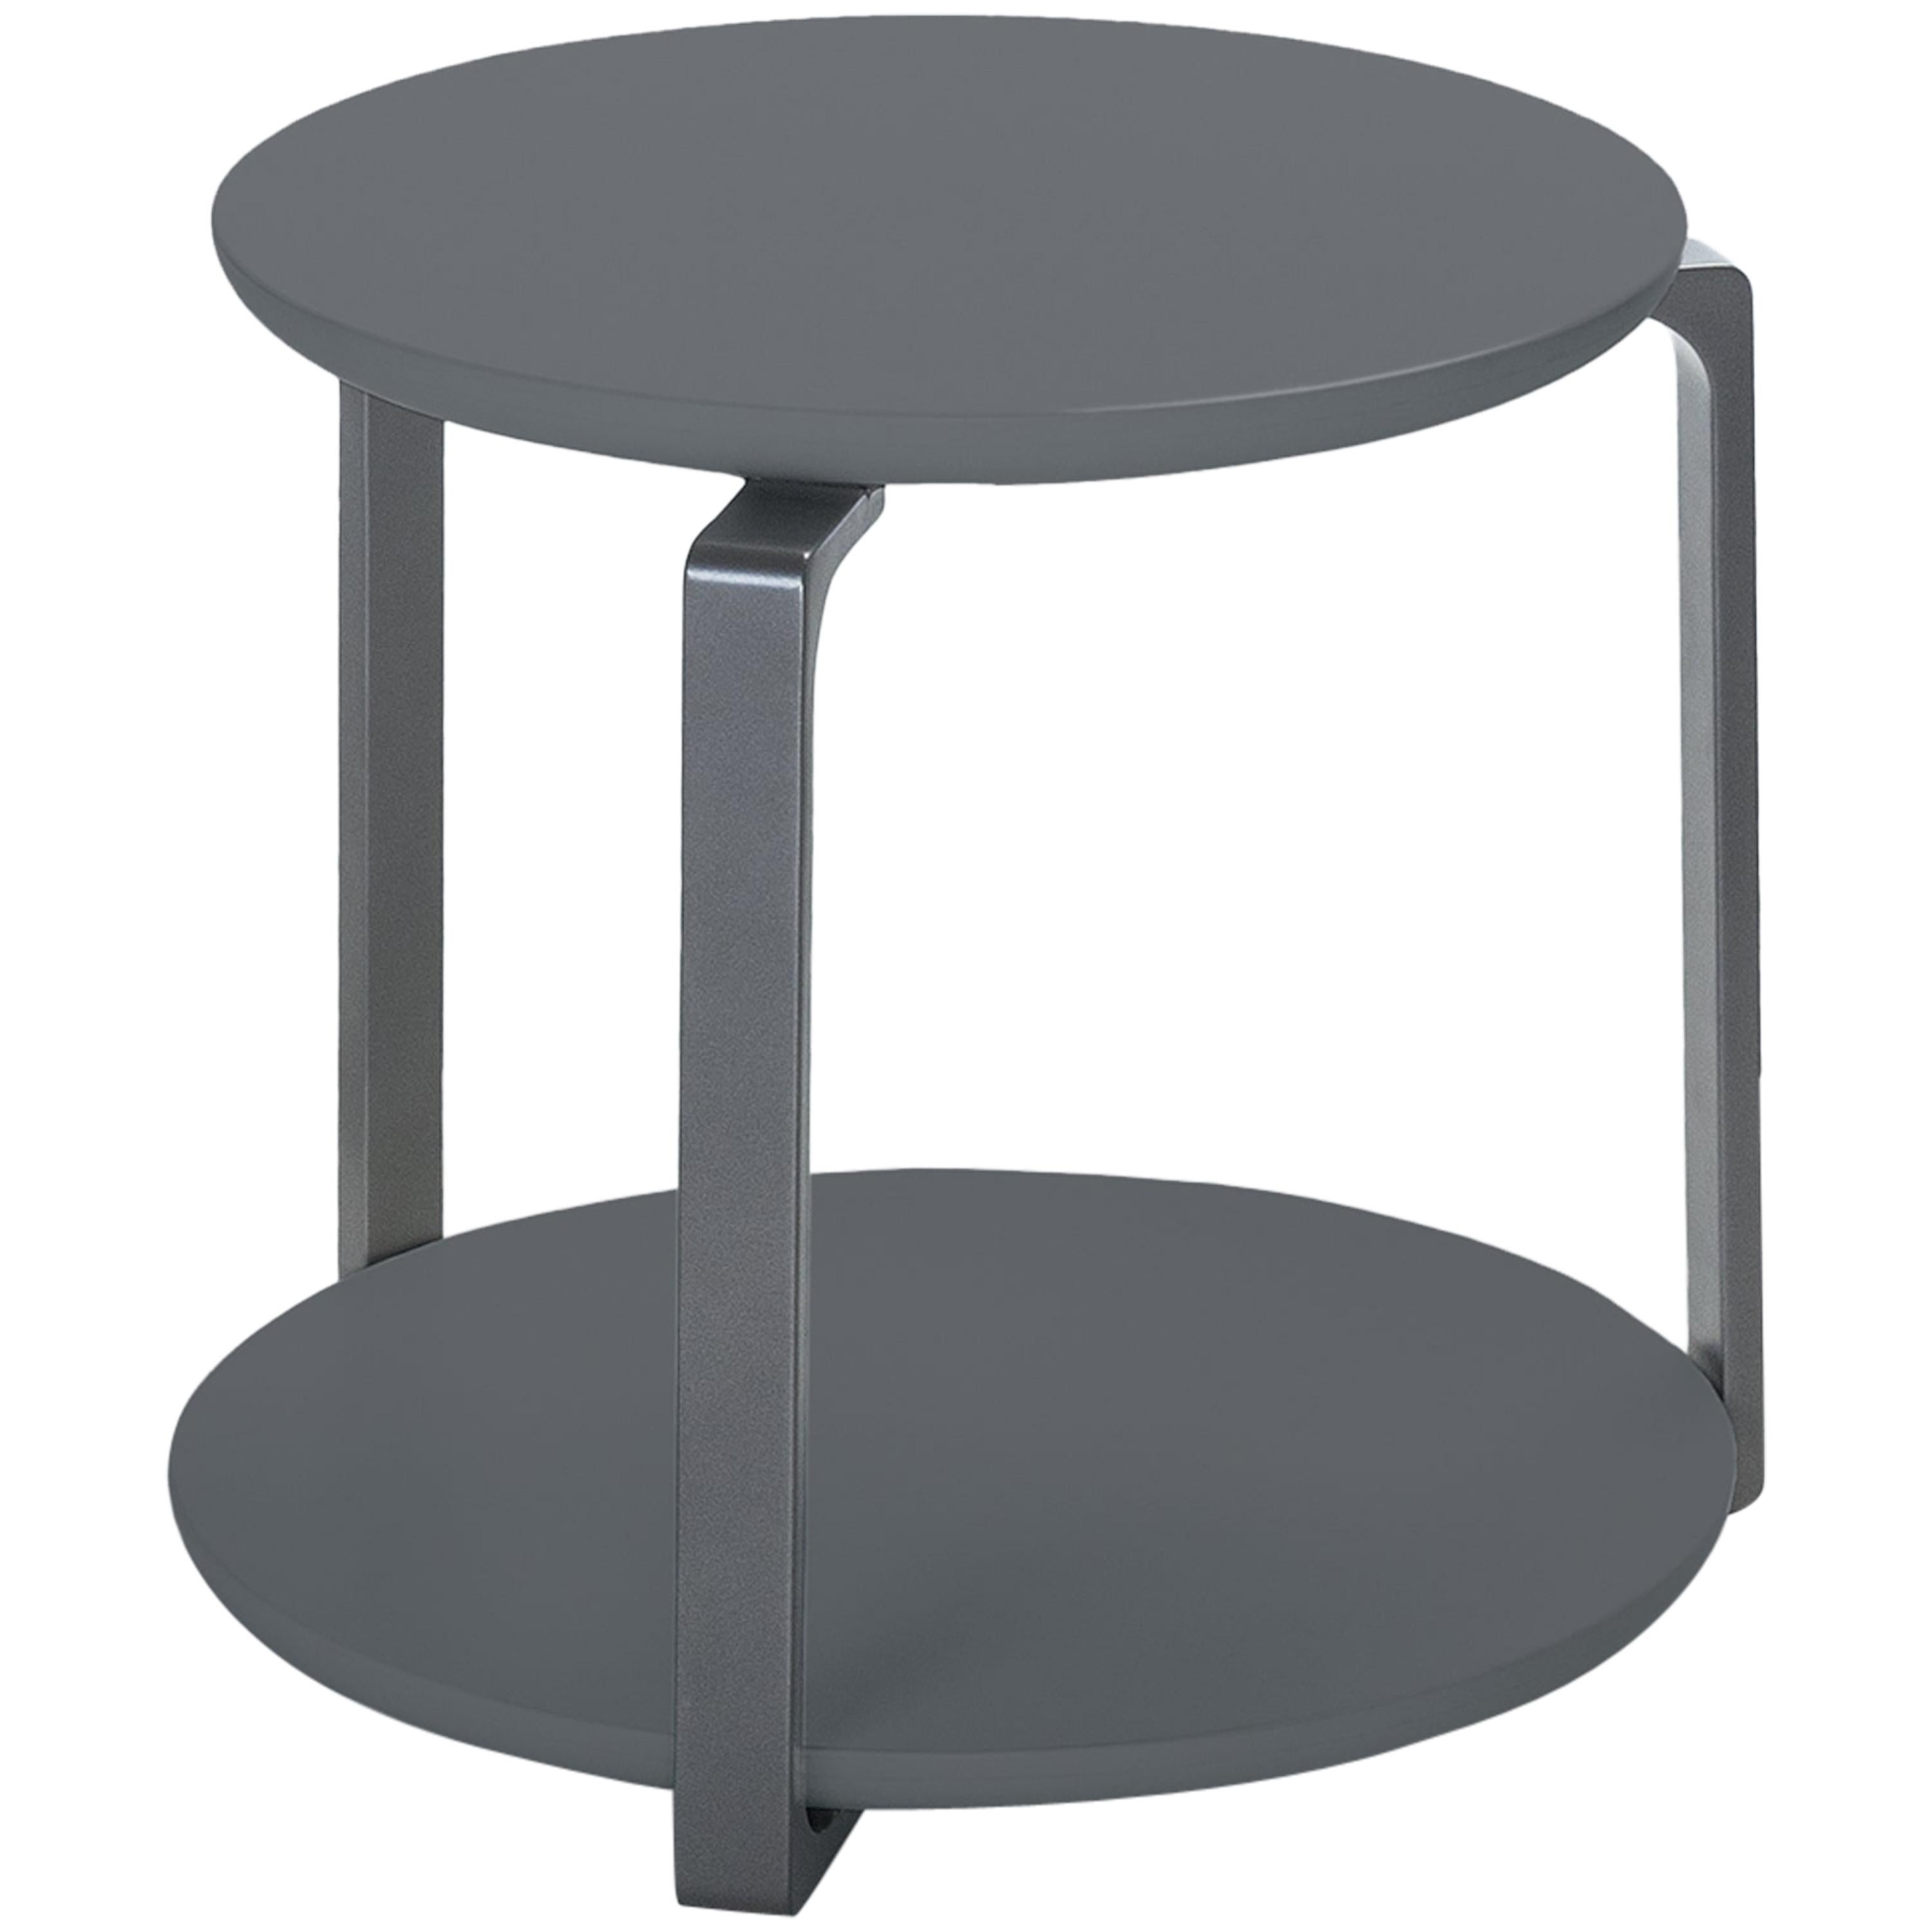 HOLLY HUNT Outdoor Plankton Round Side Table with Oyster Frame & Cobalt Grey Top